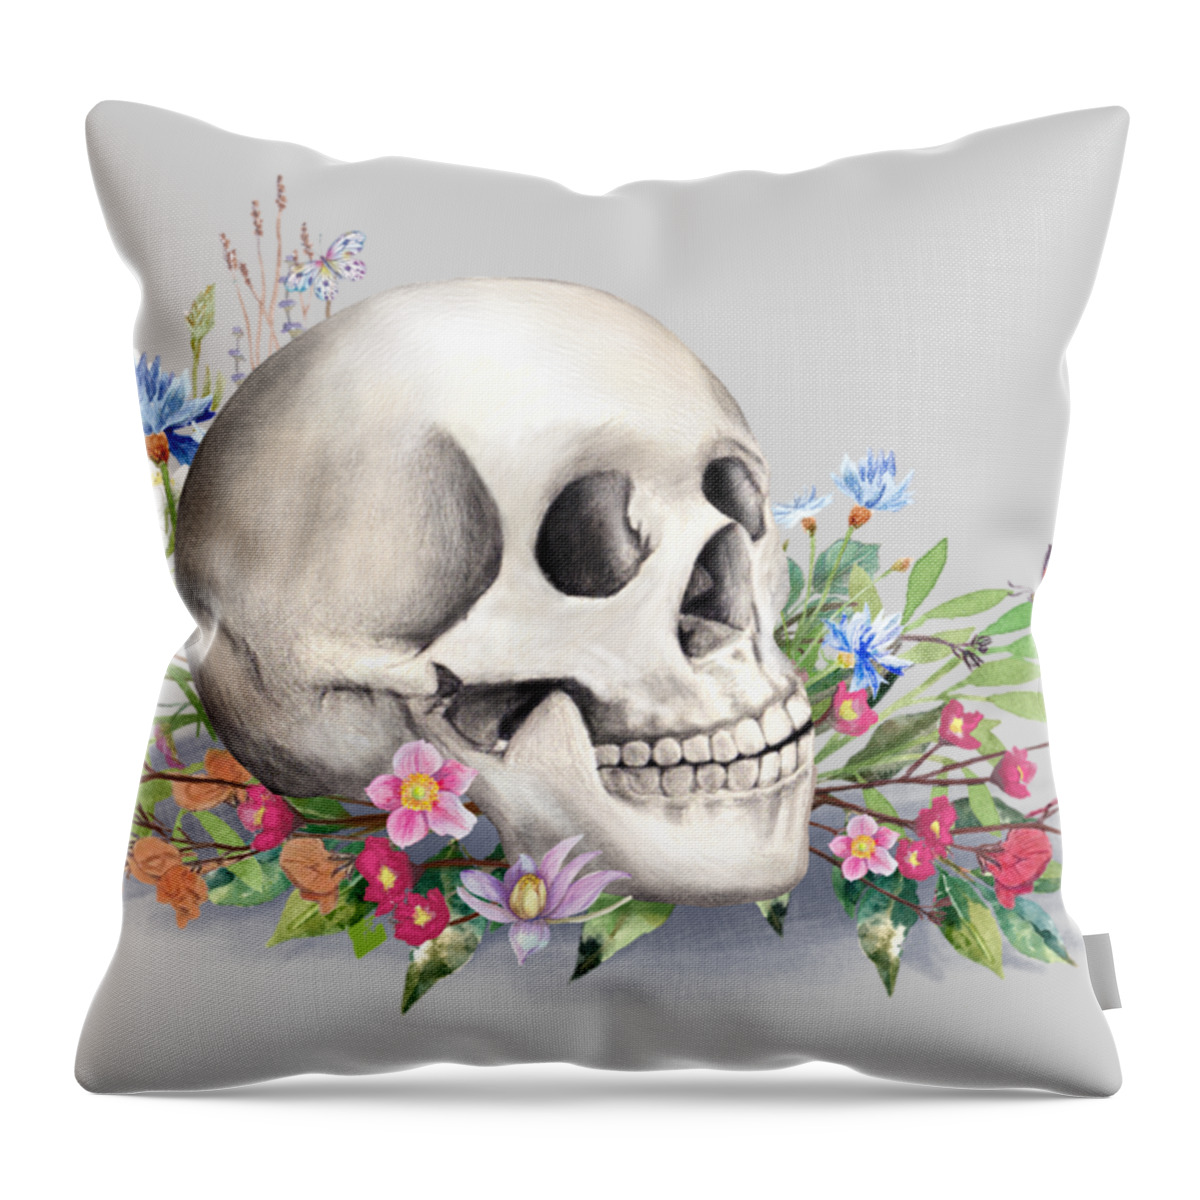 Skull Throw Pillow featuring the painting Still Life With Skull And Wildflowers by Little Bunny Sunshine